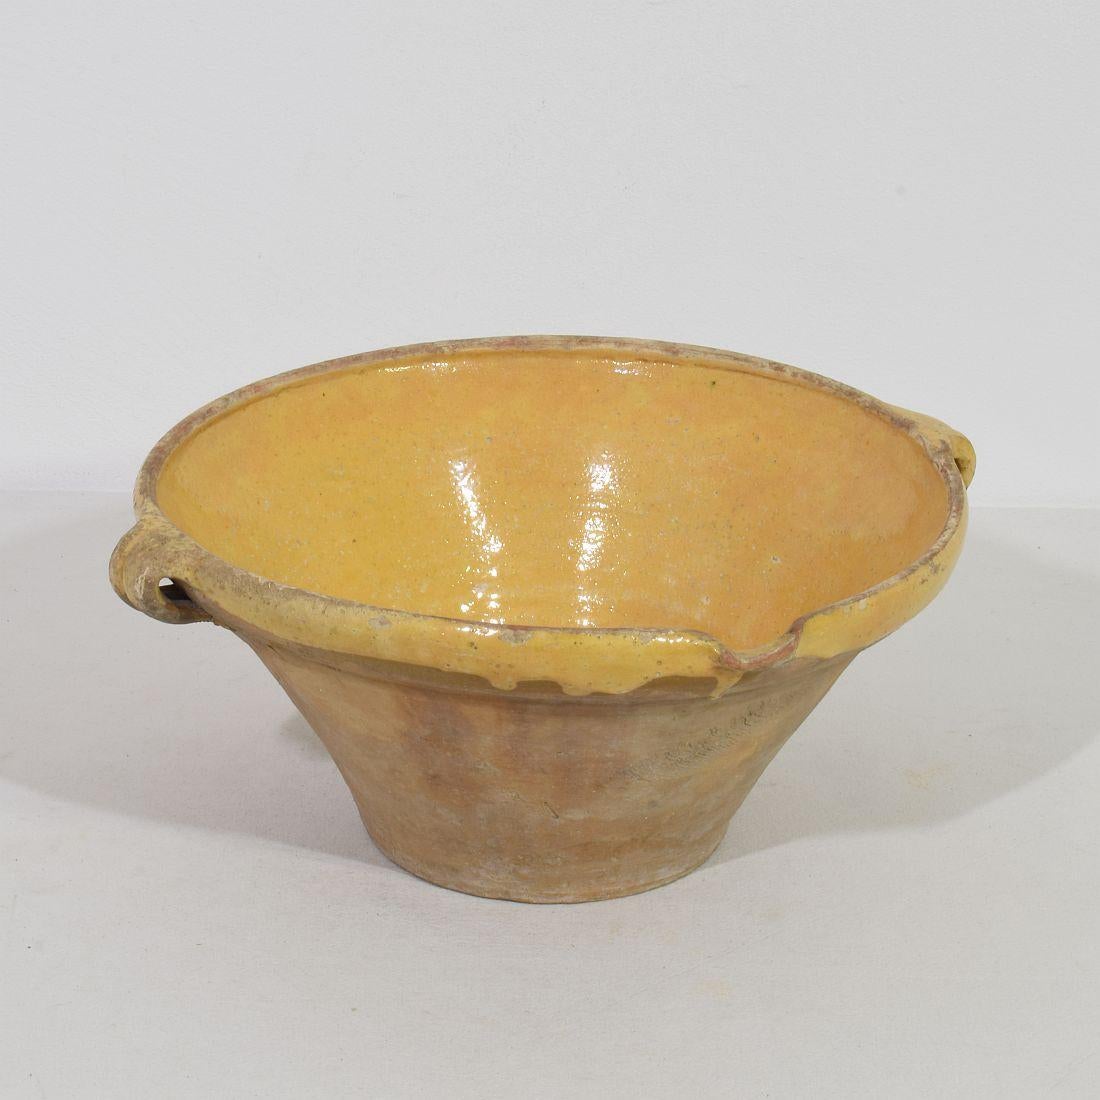 French Provincial 19th Century French Glazed Terracotta Dairy Bowl or Tian For Sale